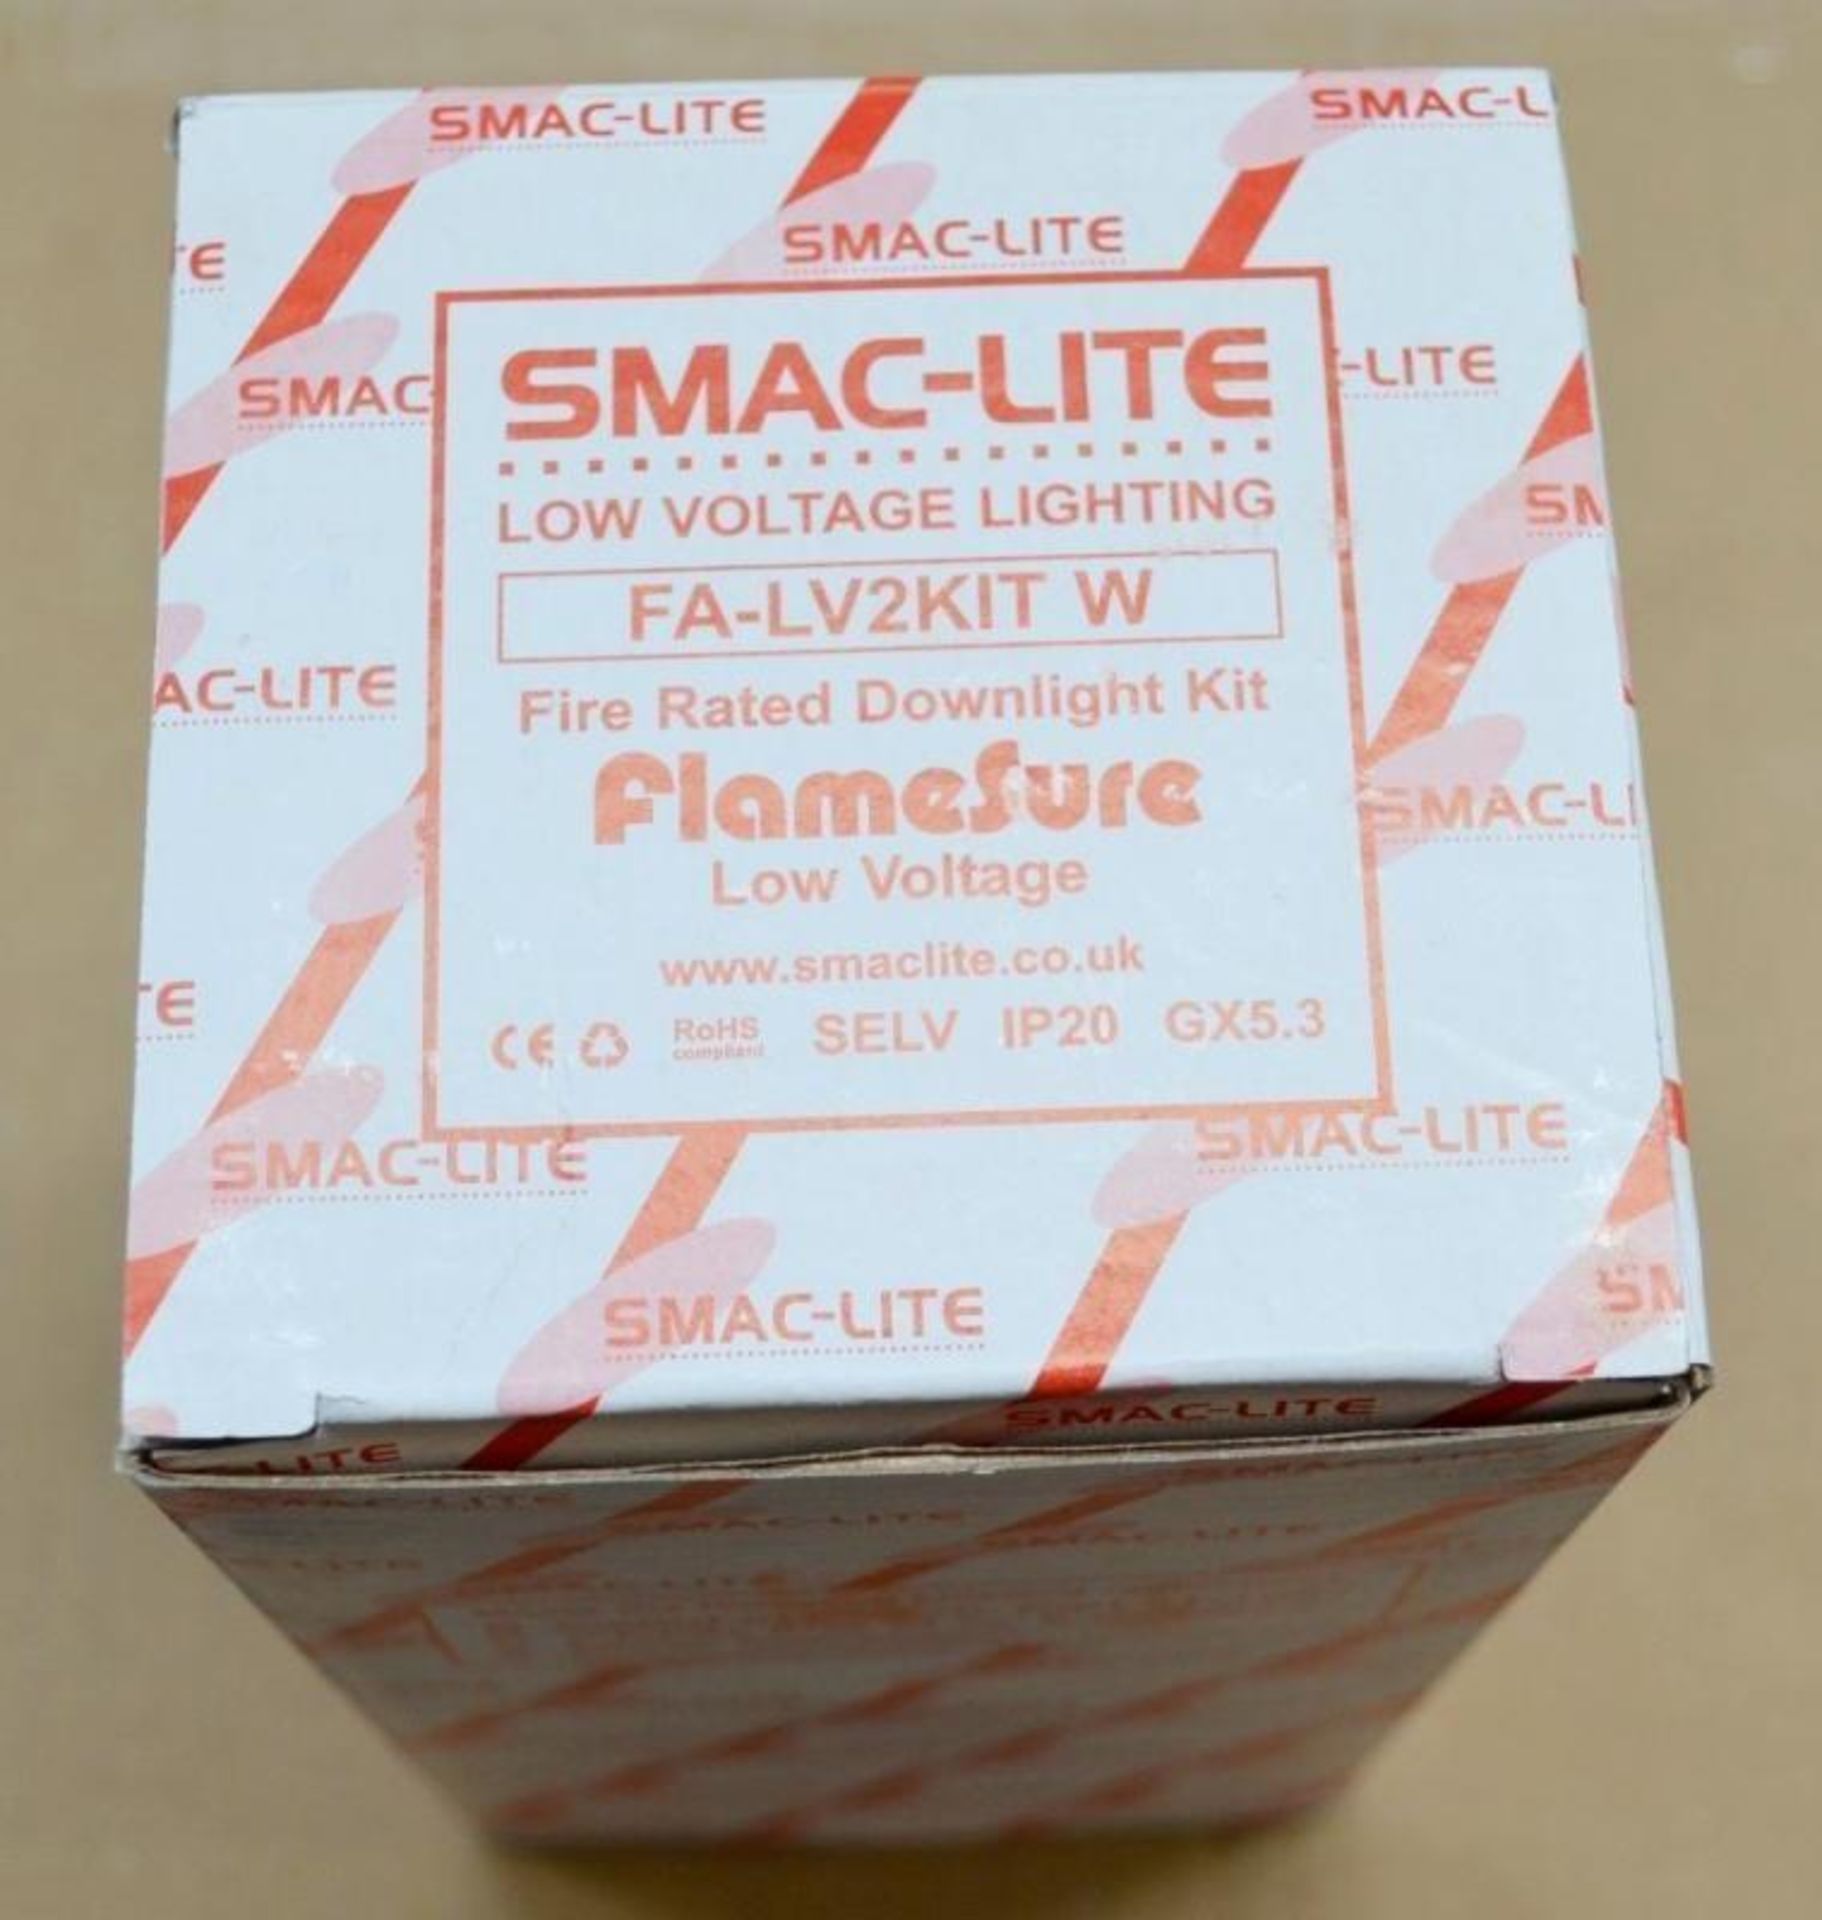 10 x Smac-lite FLAMESURE Low Voltage Fire Rated Downlight Kits - Model: FA-LV2KIT - IP20 - Includes - Image 3 of 9